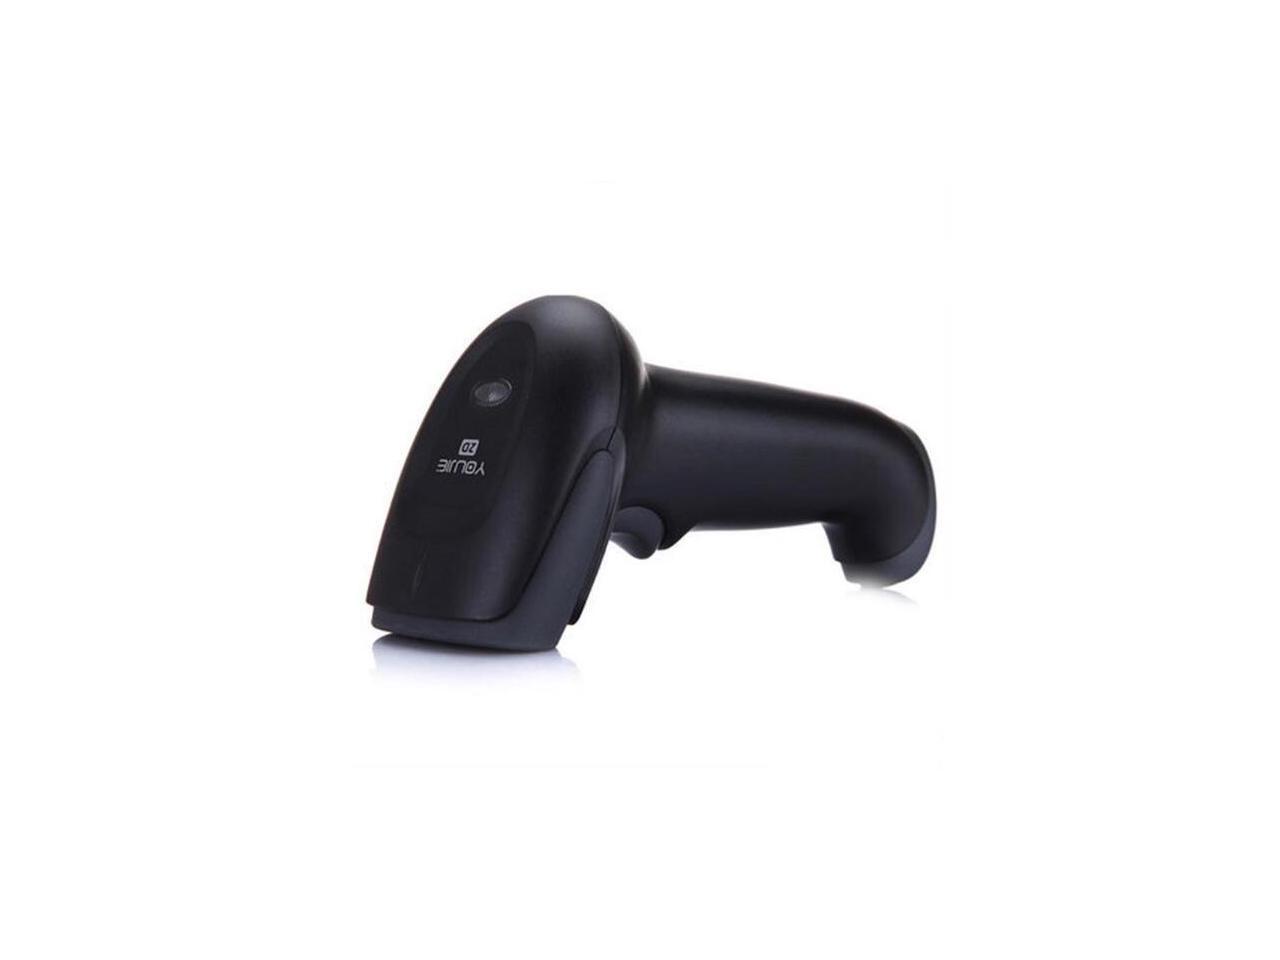 Honeywell Yj4600 2d Hand Held Bar Code Scanner With Usb Cable Black 9461